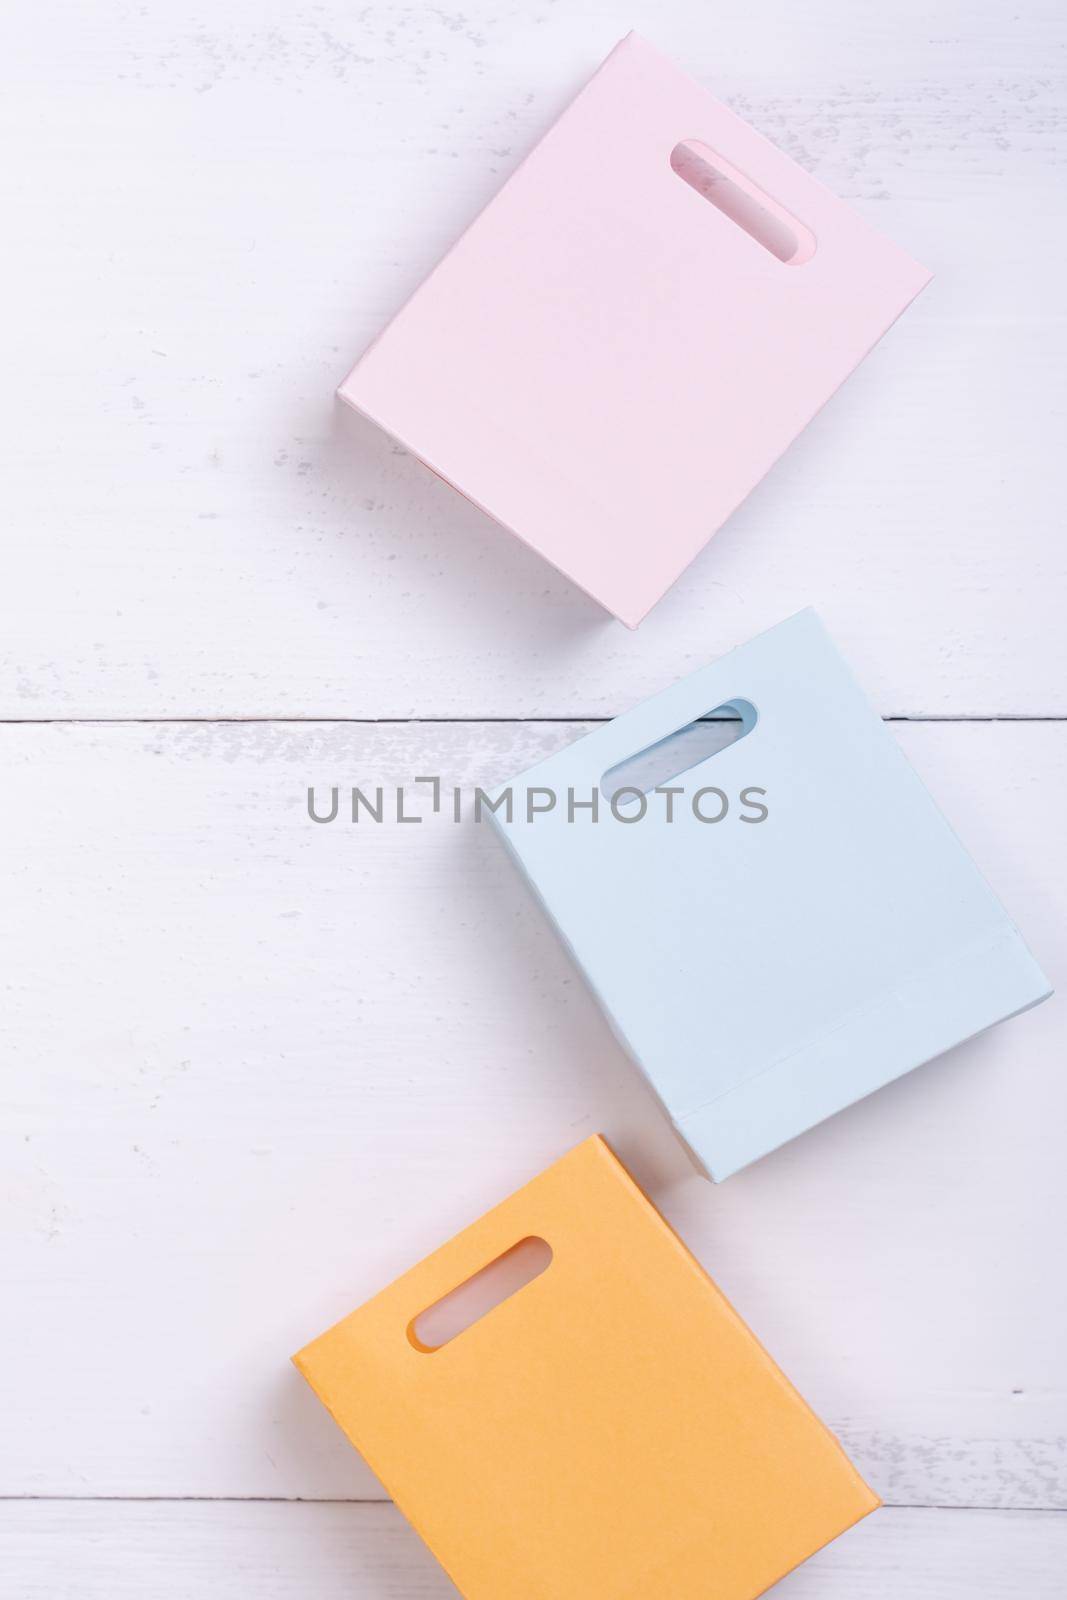 Abstract design element, annual sale, shopping season concept, mini cart with colorful paper bag on white wooden table background, top view, flat lay